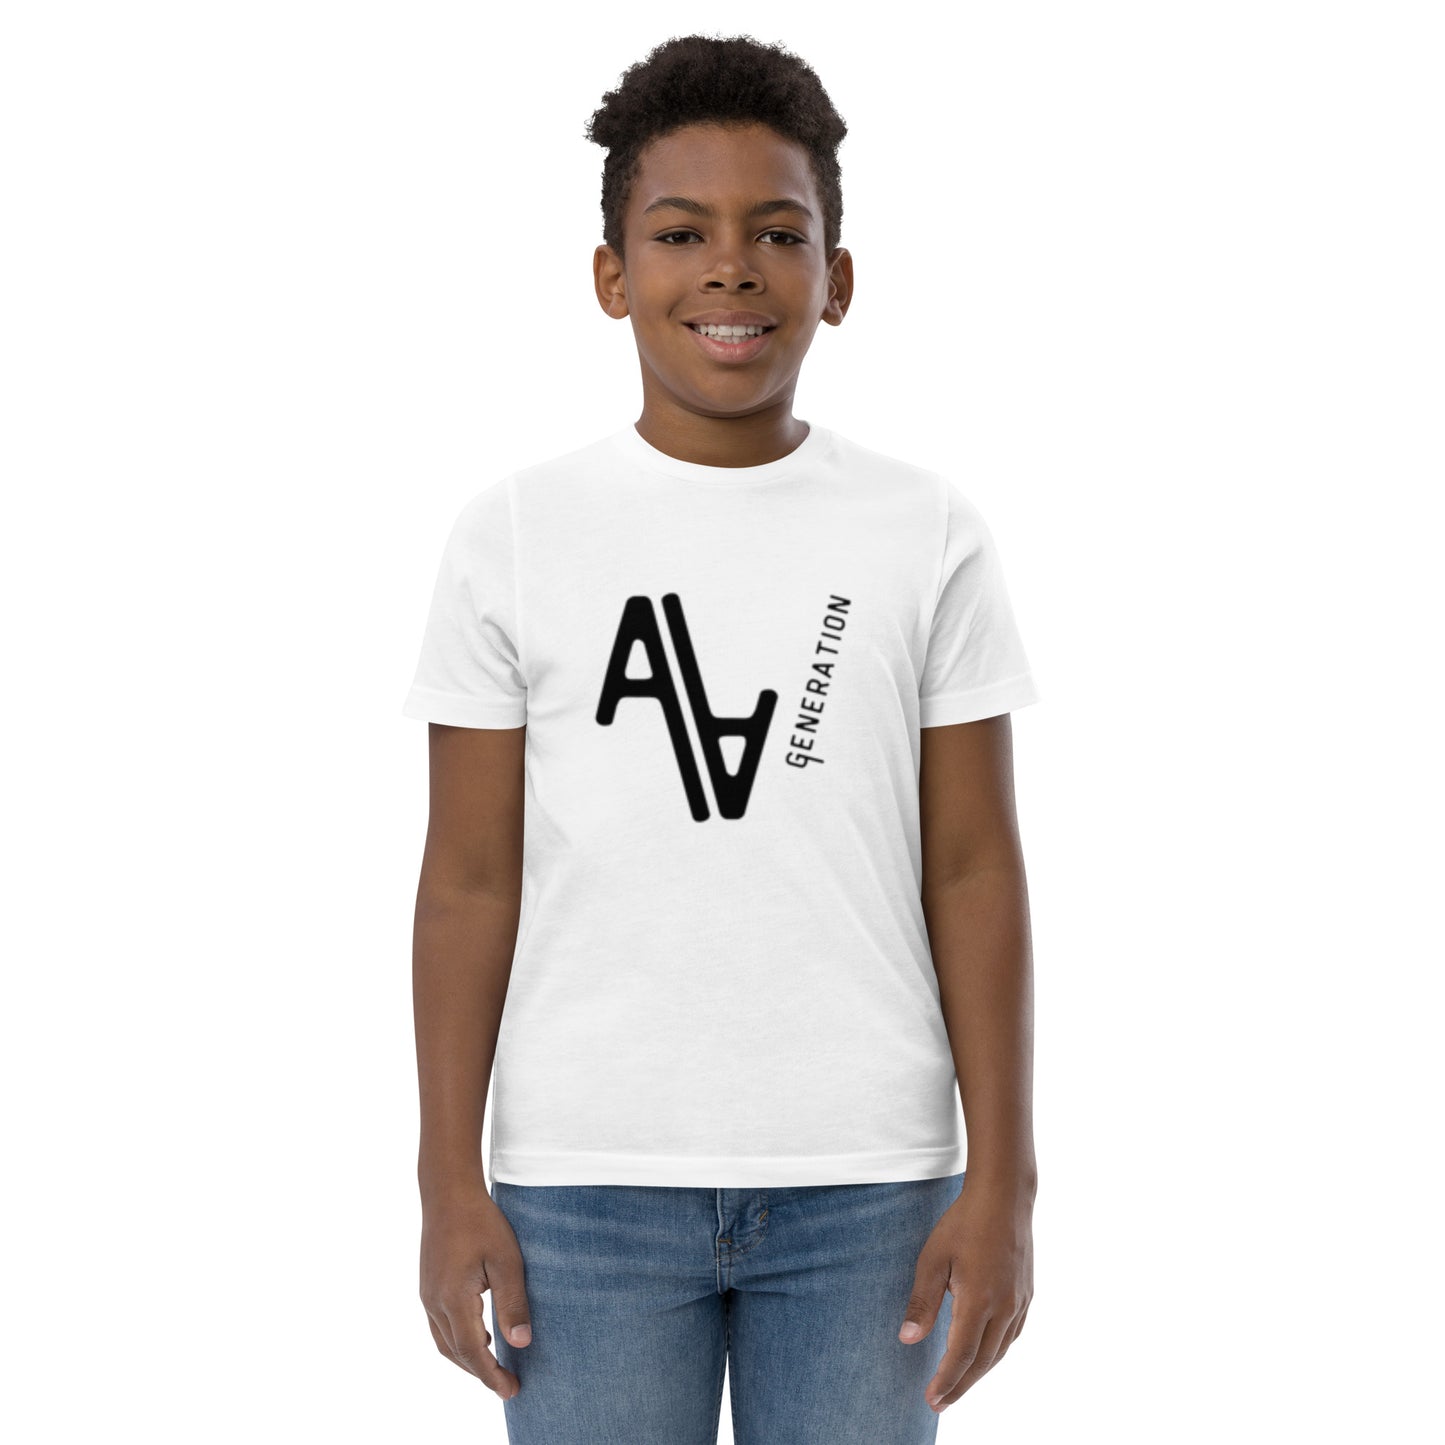 Double A Youth Unisex T-shirt